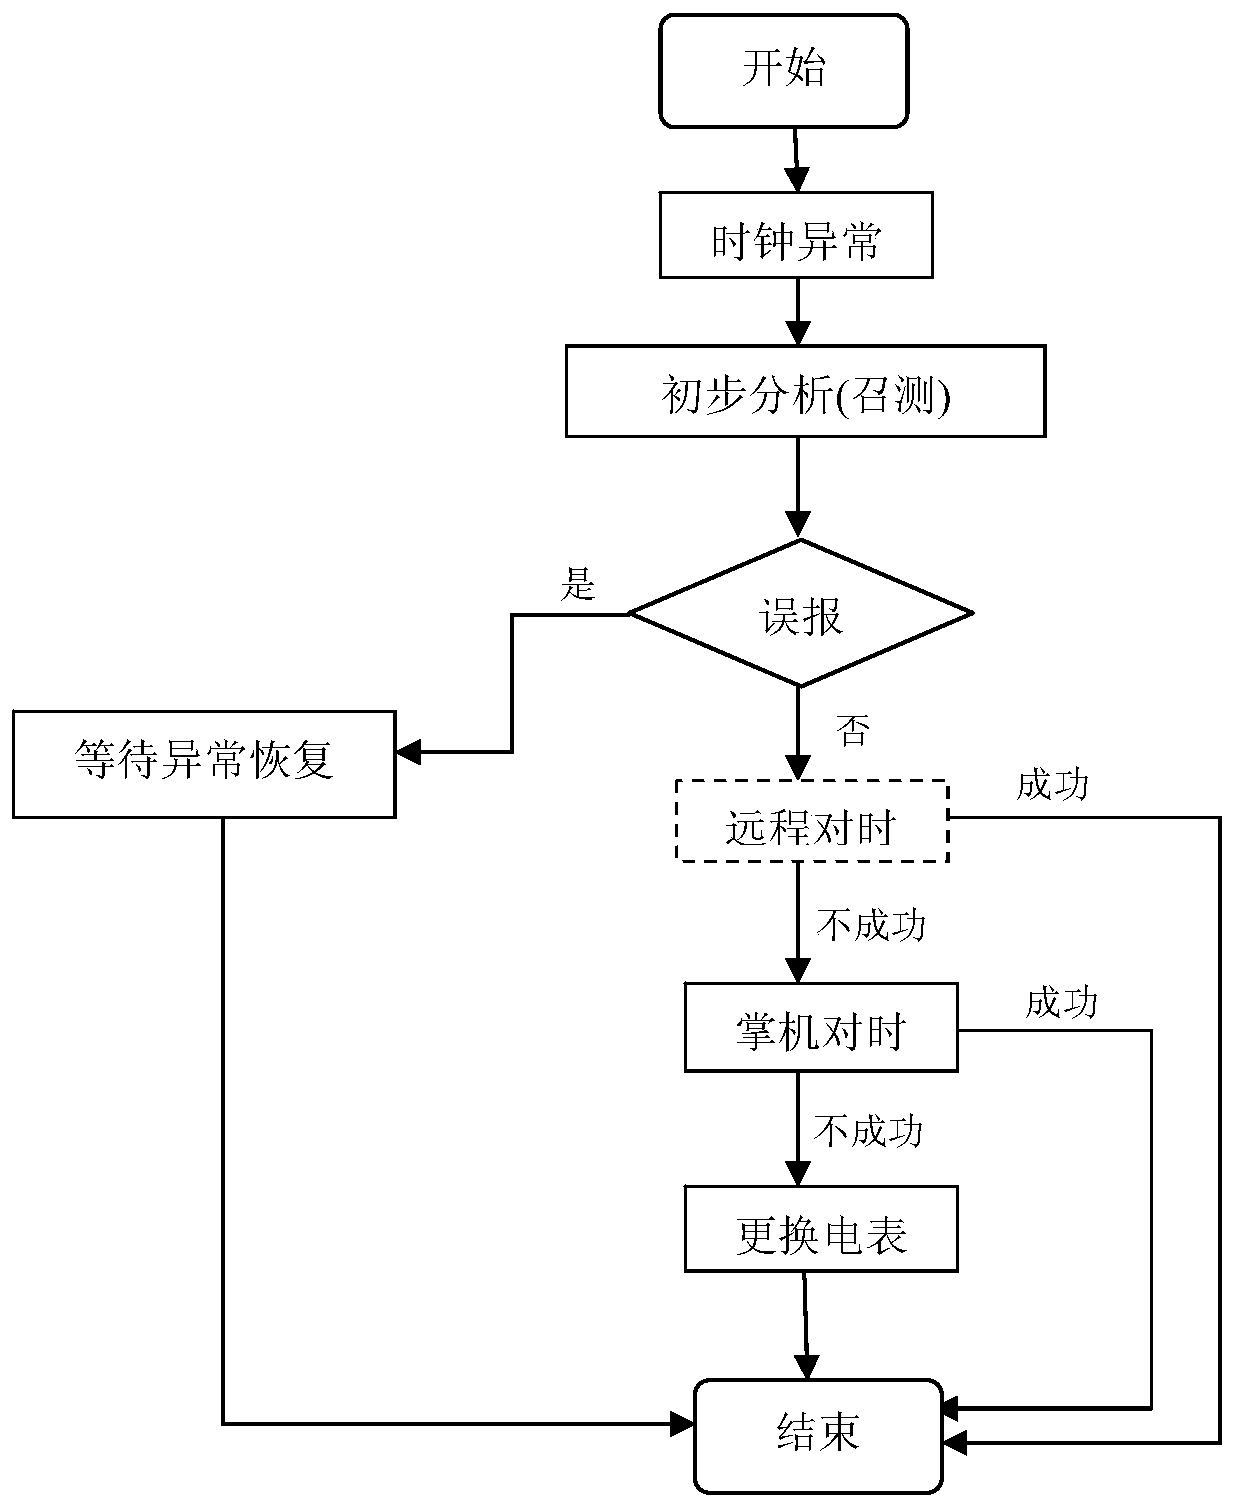 Electricity consumption information acquisition system clock management method and device